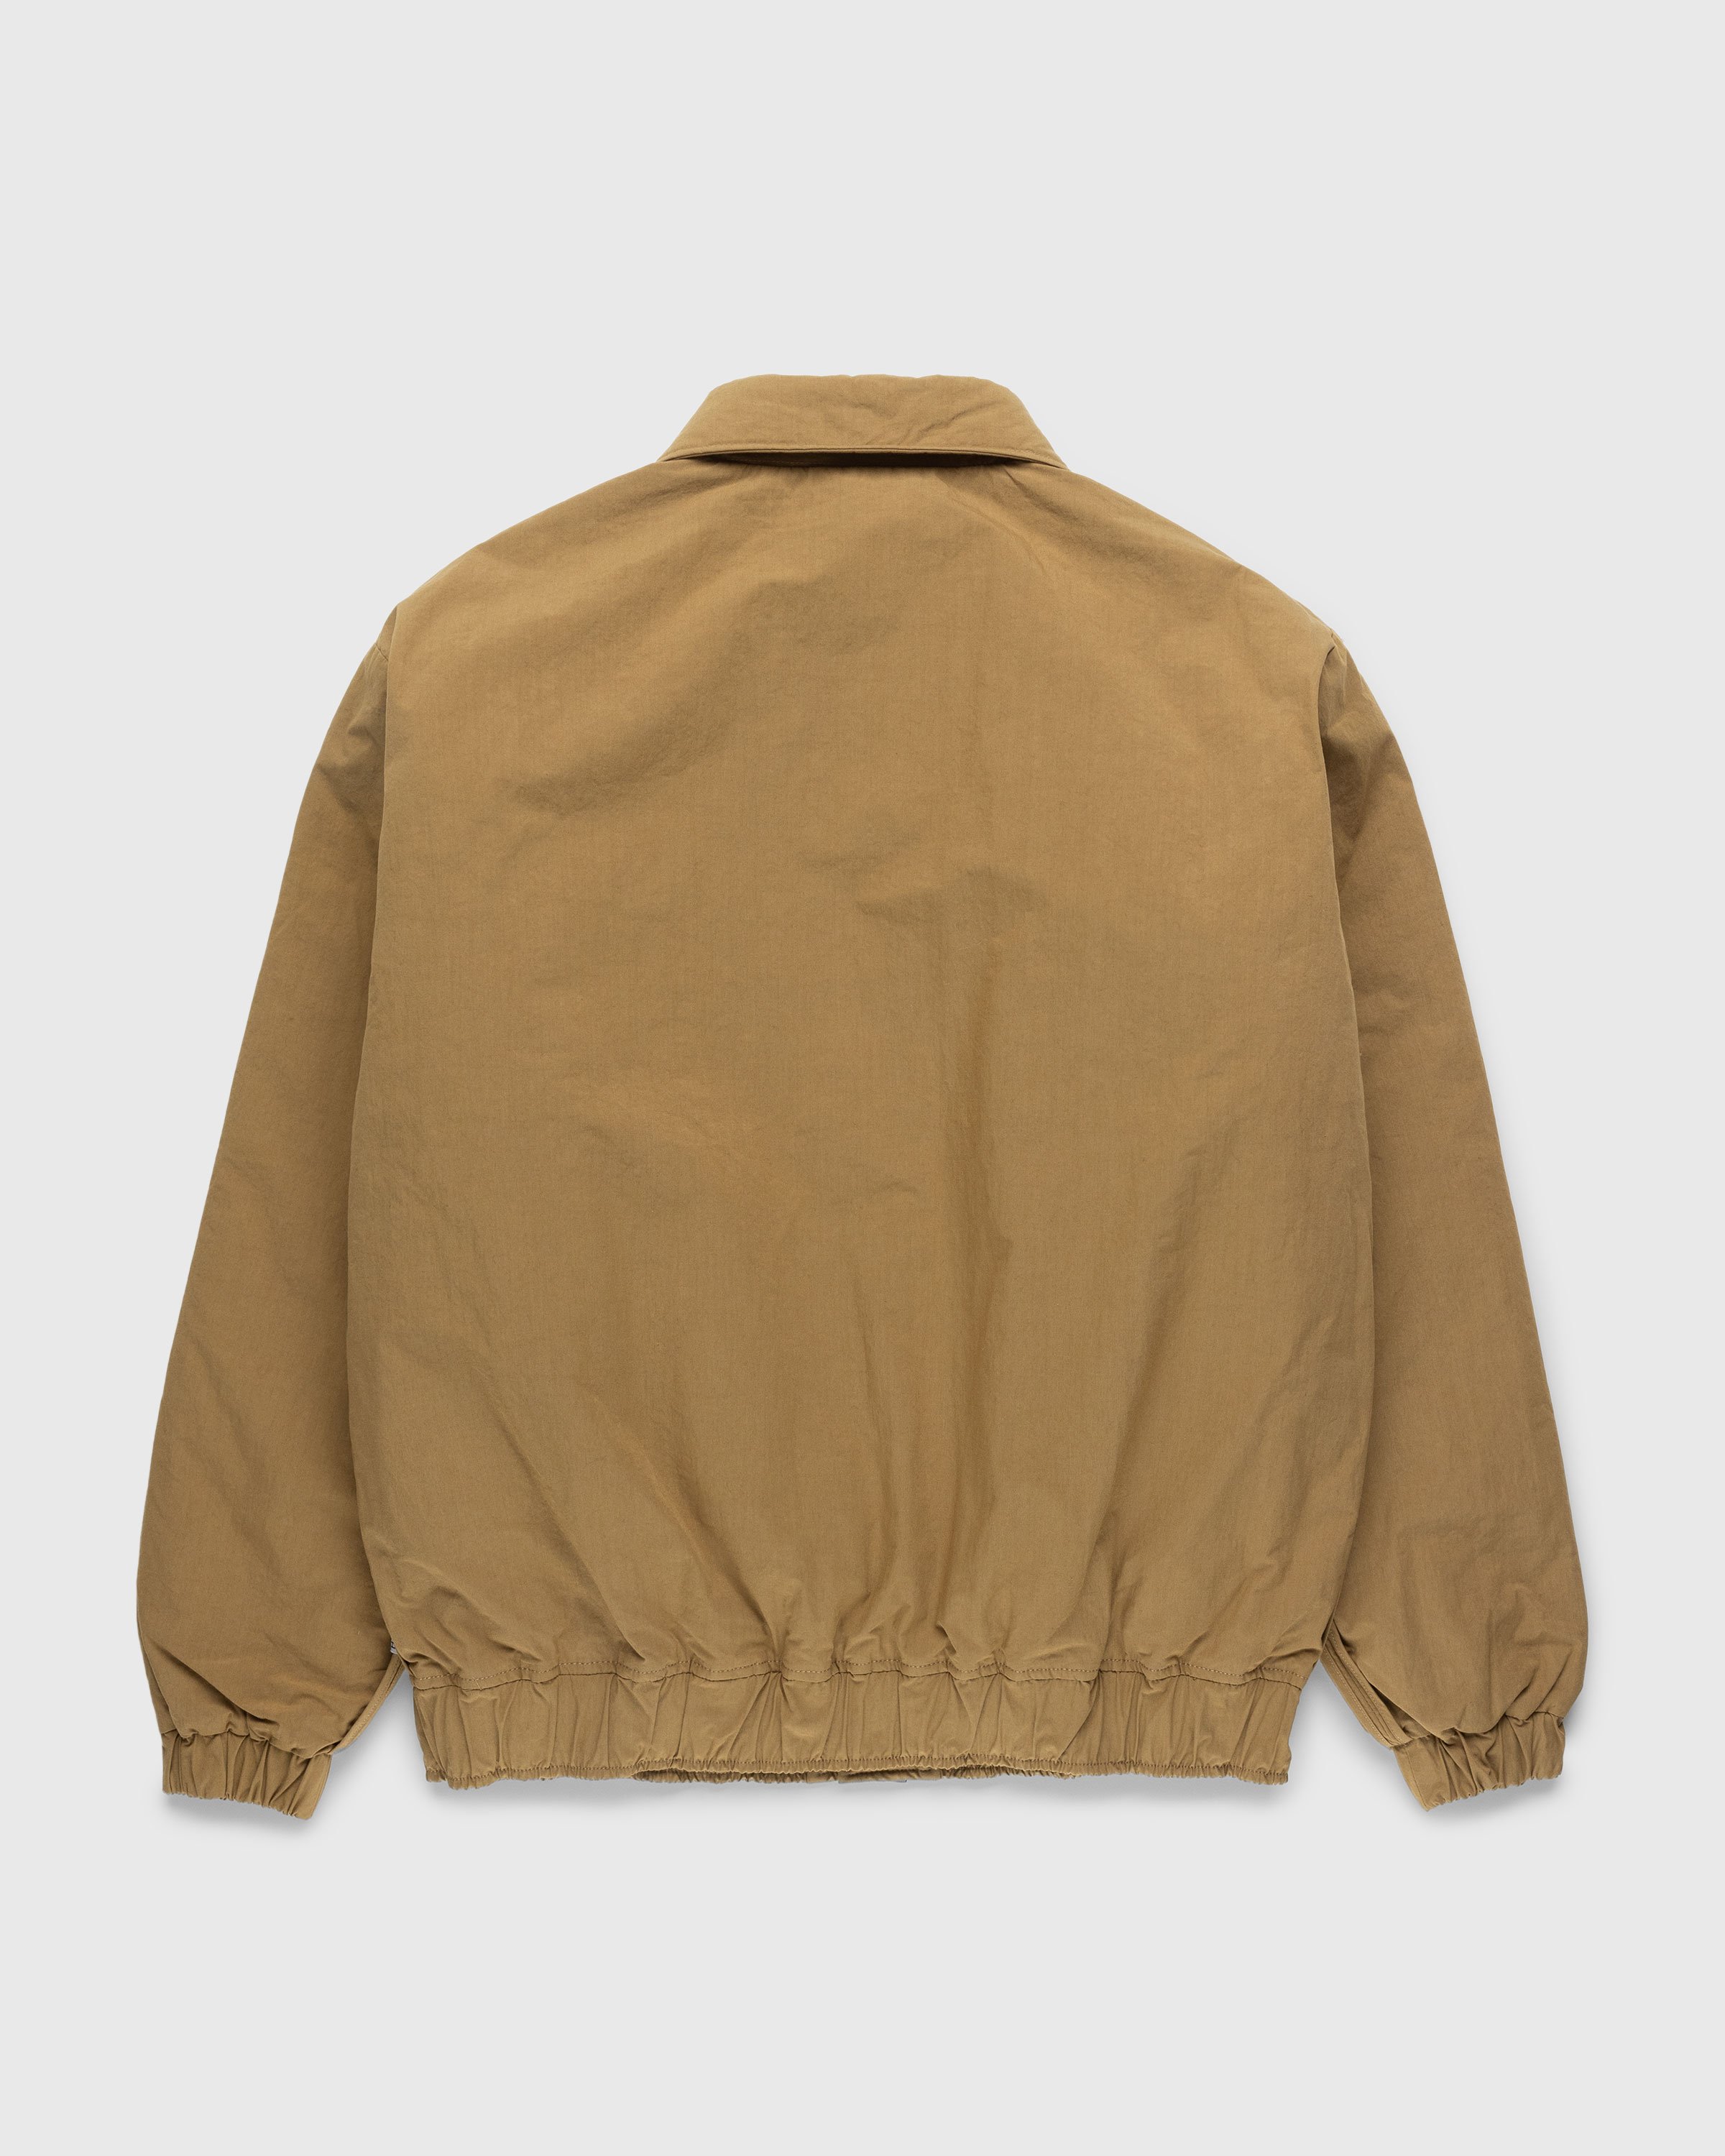 Highsnobiety HS05 - Reverse Piping Insulated Jacket Beige - Clothing - Beige - Image 2